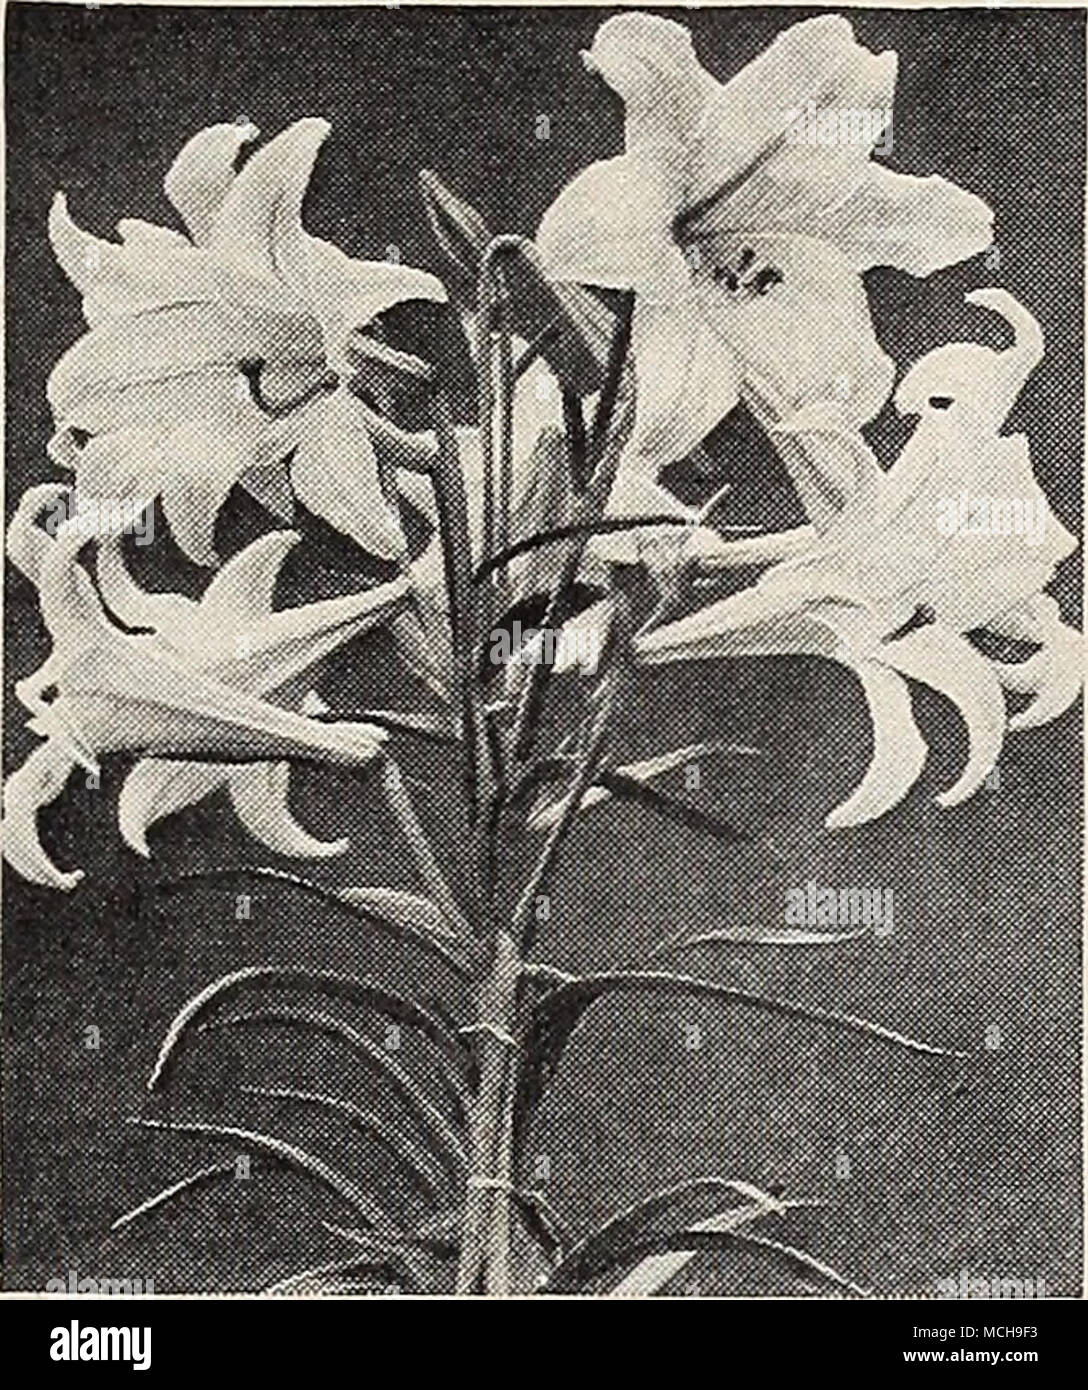 . I-ilium Harrisi Three Splendid Lilies for Growing Indoors Harrisi {Bermuda Easter Lily). A great favorite. August delivery. 40-575 Extra-Large Bulbs: 45c each; 3 for $1.15; 12 for $4.00. 40-576 Mammoth Bulbs: 60c each; 3 for $1.65; 12 for $6.00. 40-577 Monster Bulbs: $1.50 each; 3 for $4.00; 12 for $15.00. Longiflorum Erabu, Very vigorous and tall. September delivery. 40-585 Extra-Large Bulbs: 30c each; 12 for $3.00; 25 for $5.00. 40-586 Mammoth Bulbs: 40c each; 12 for $4.00; 25 for $7.50. Longiflorum giganteum {Asiatic Easter Lily). November delivery. 40-588 Extra-Large Bulbs: 30c each; 12  Stock Photo